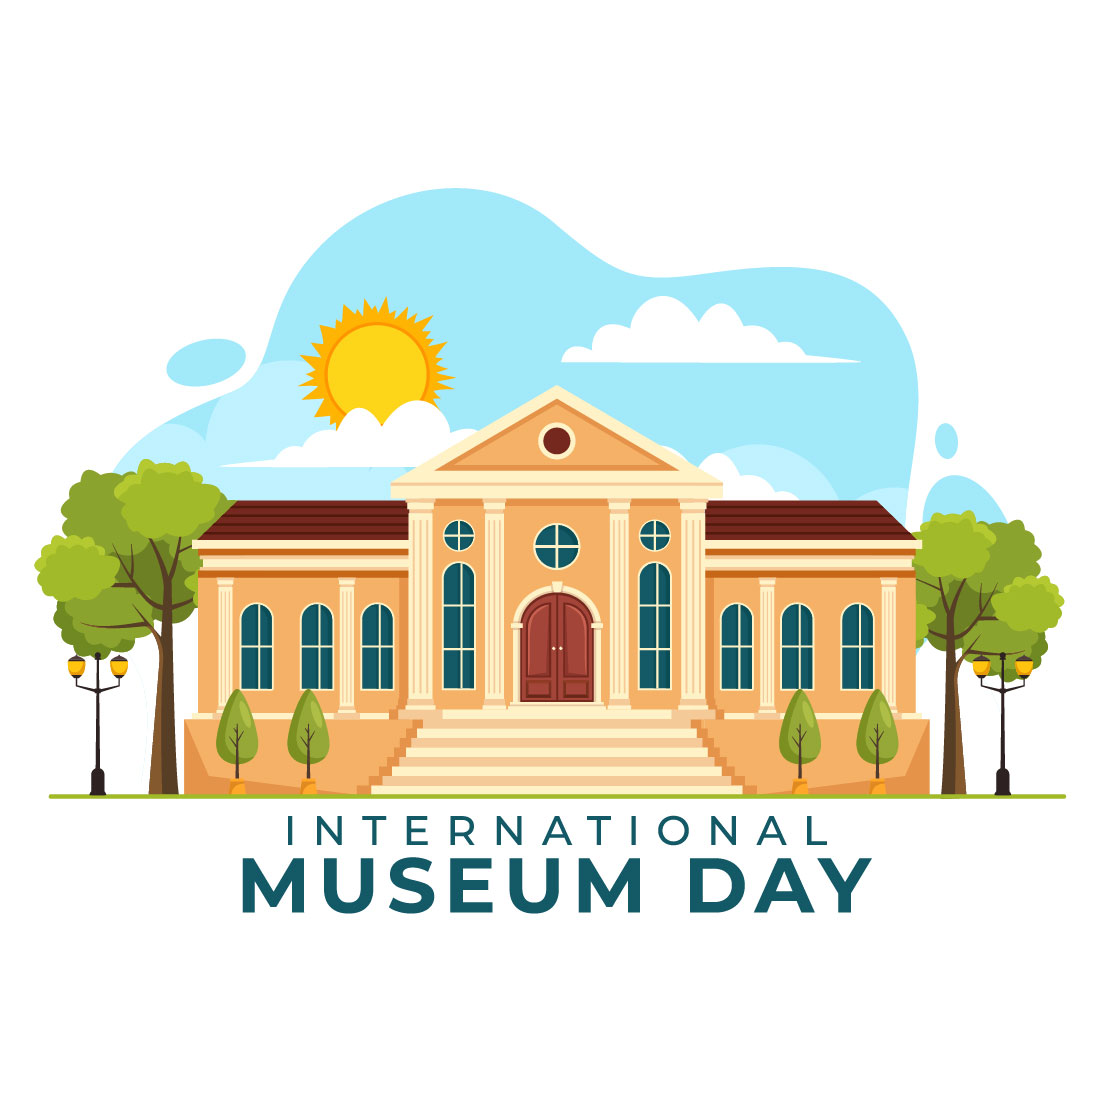 12 International Museum Day Illustration preview image.